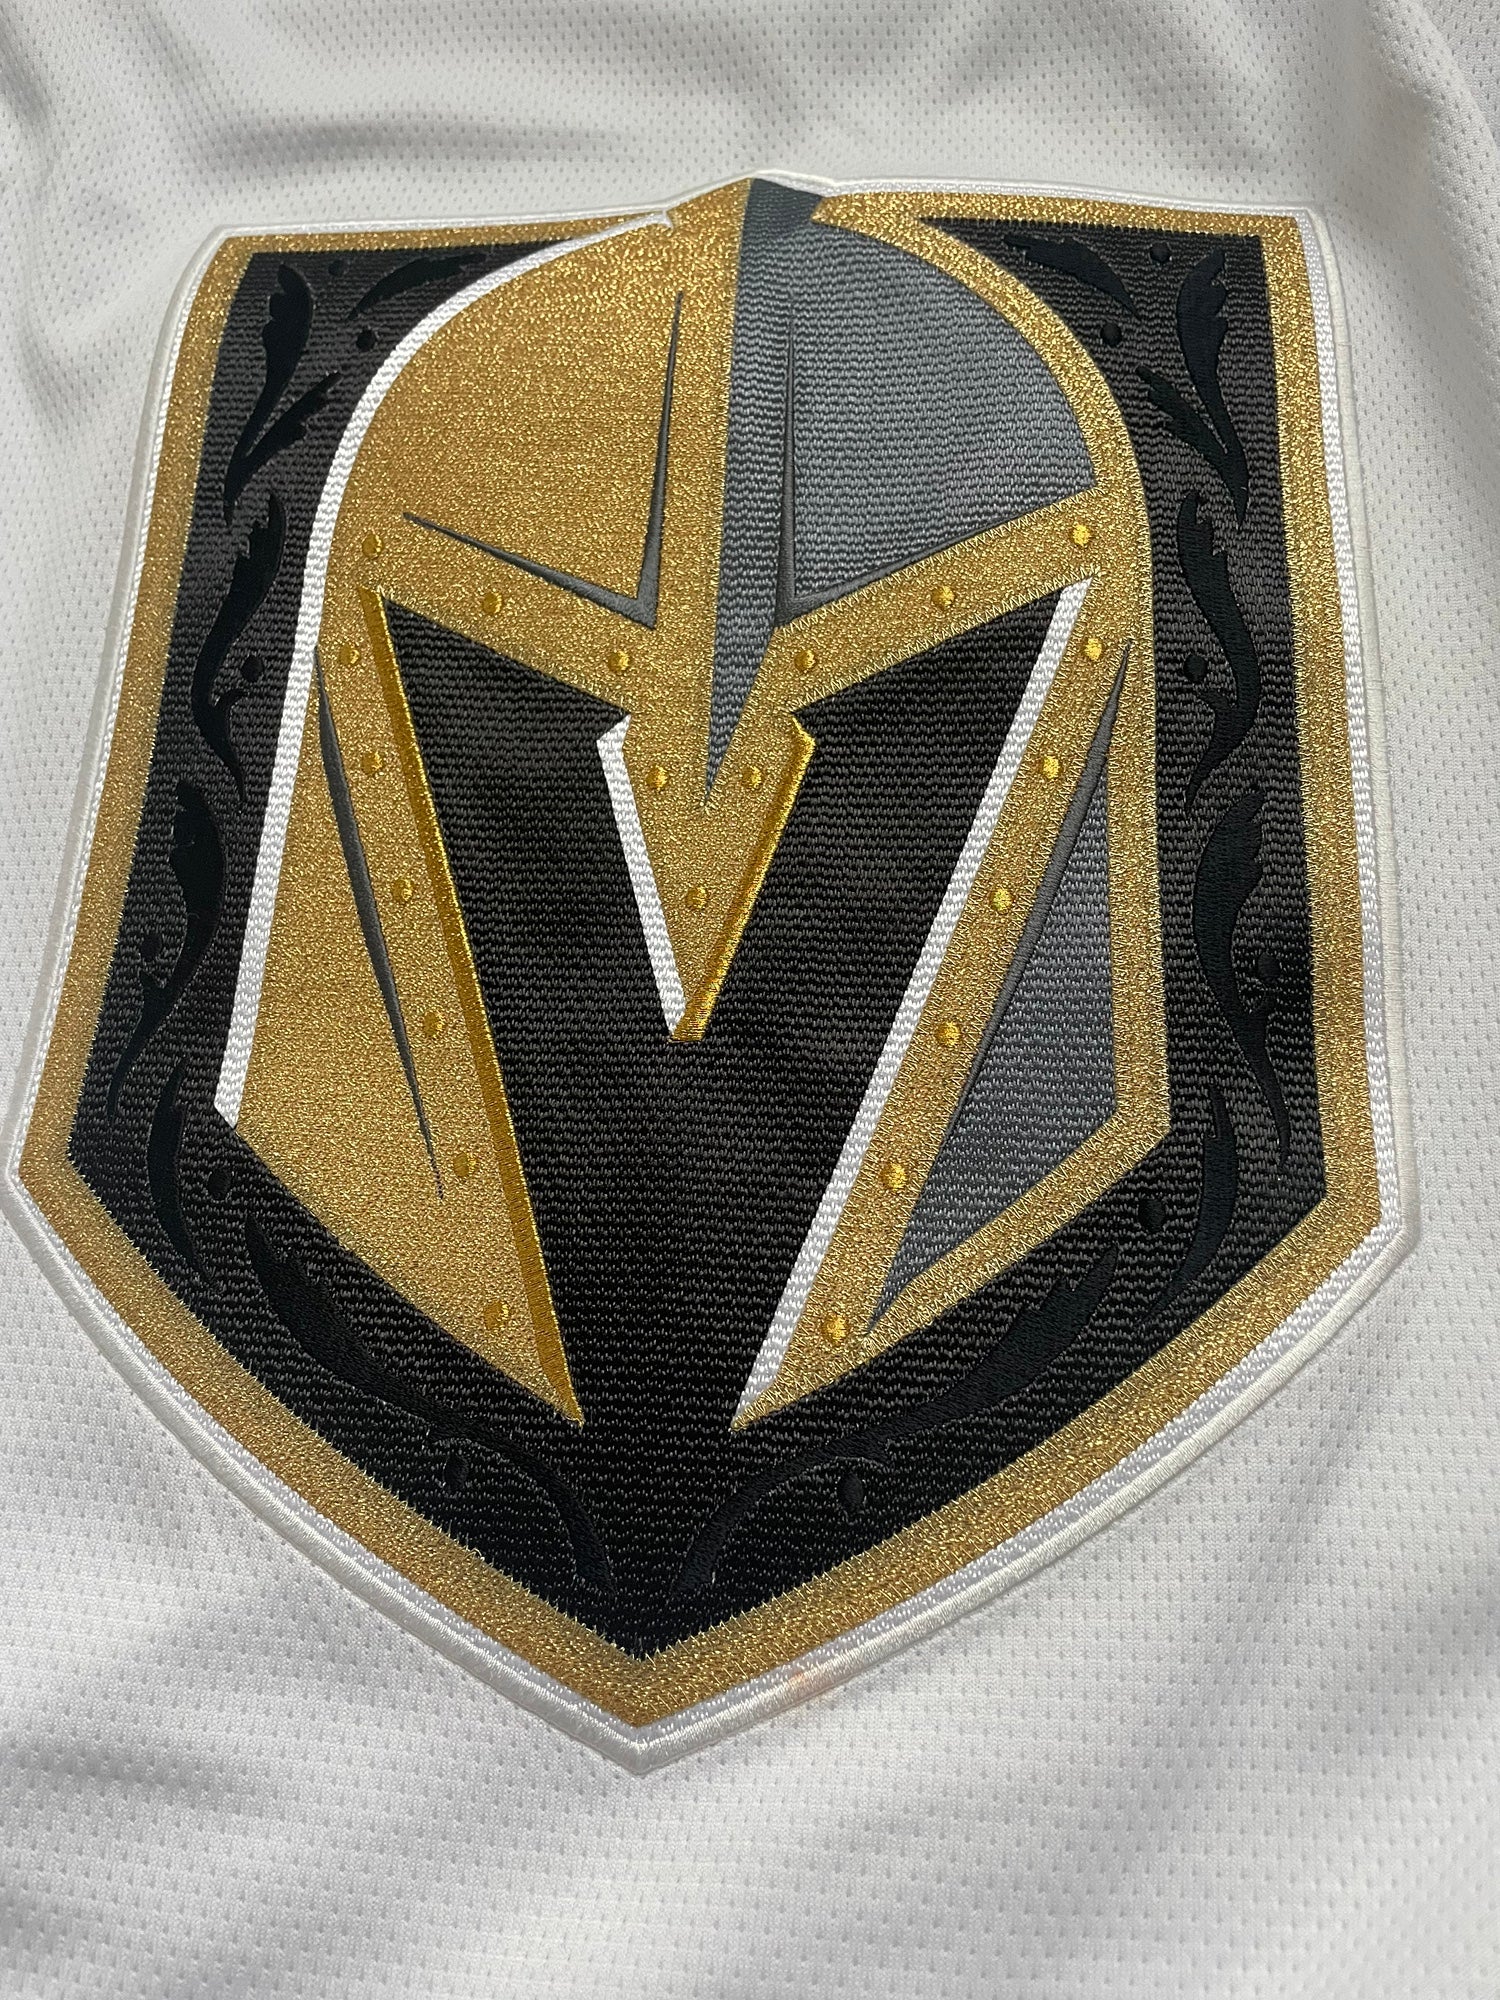 Marc-Andre Fleury Vegas Golden Knights Fanatics Branded 2020/21 Special  Edition Breakaway Player Jersey - Red